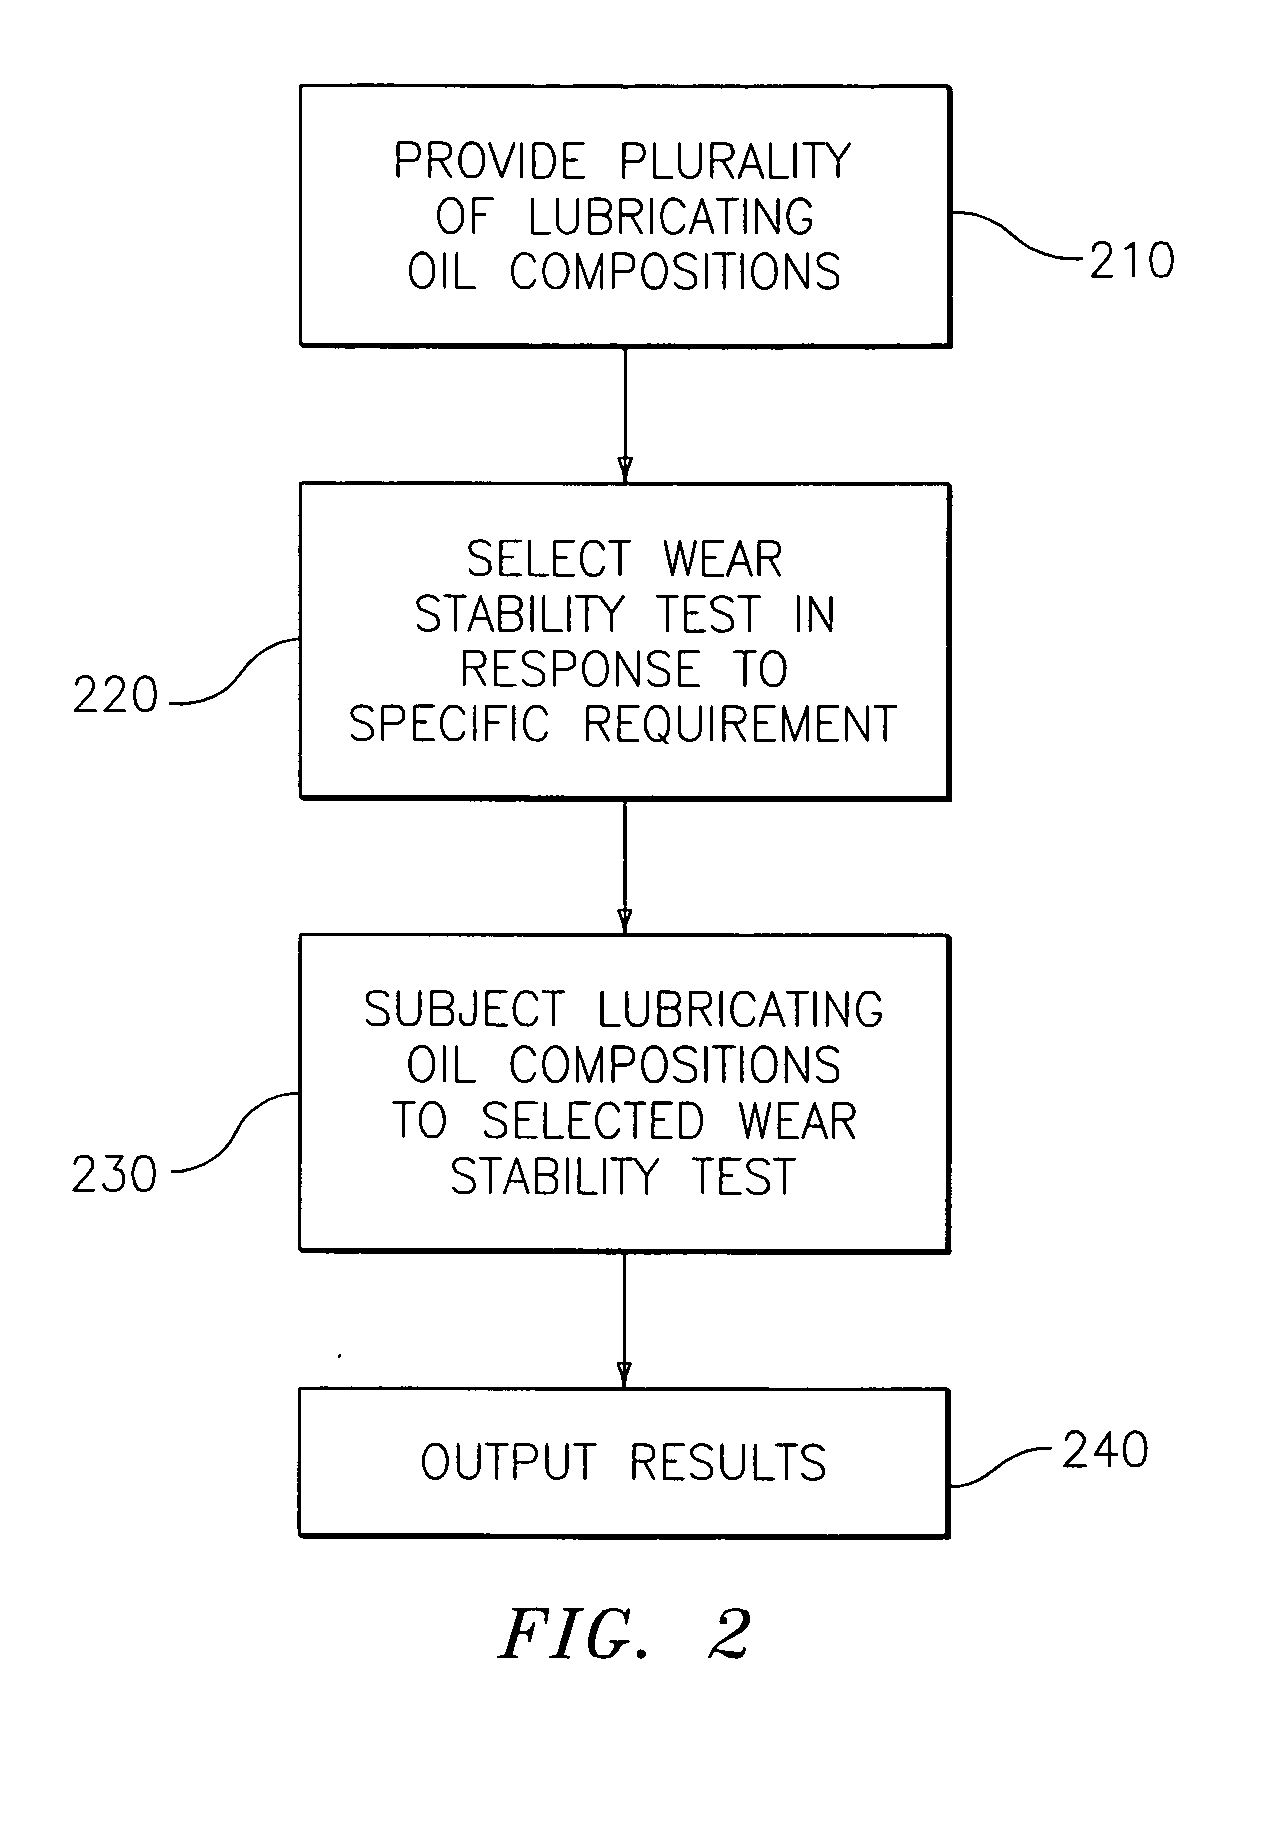 High throughput screening methods for lubricating oil compositions